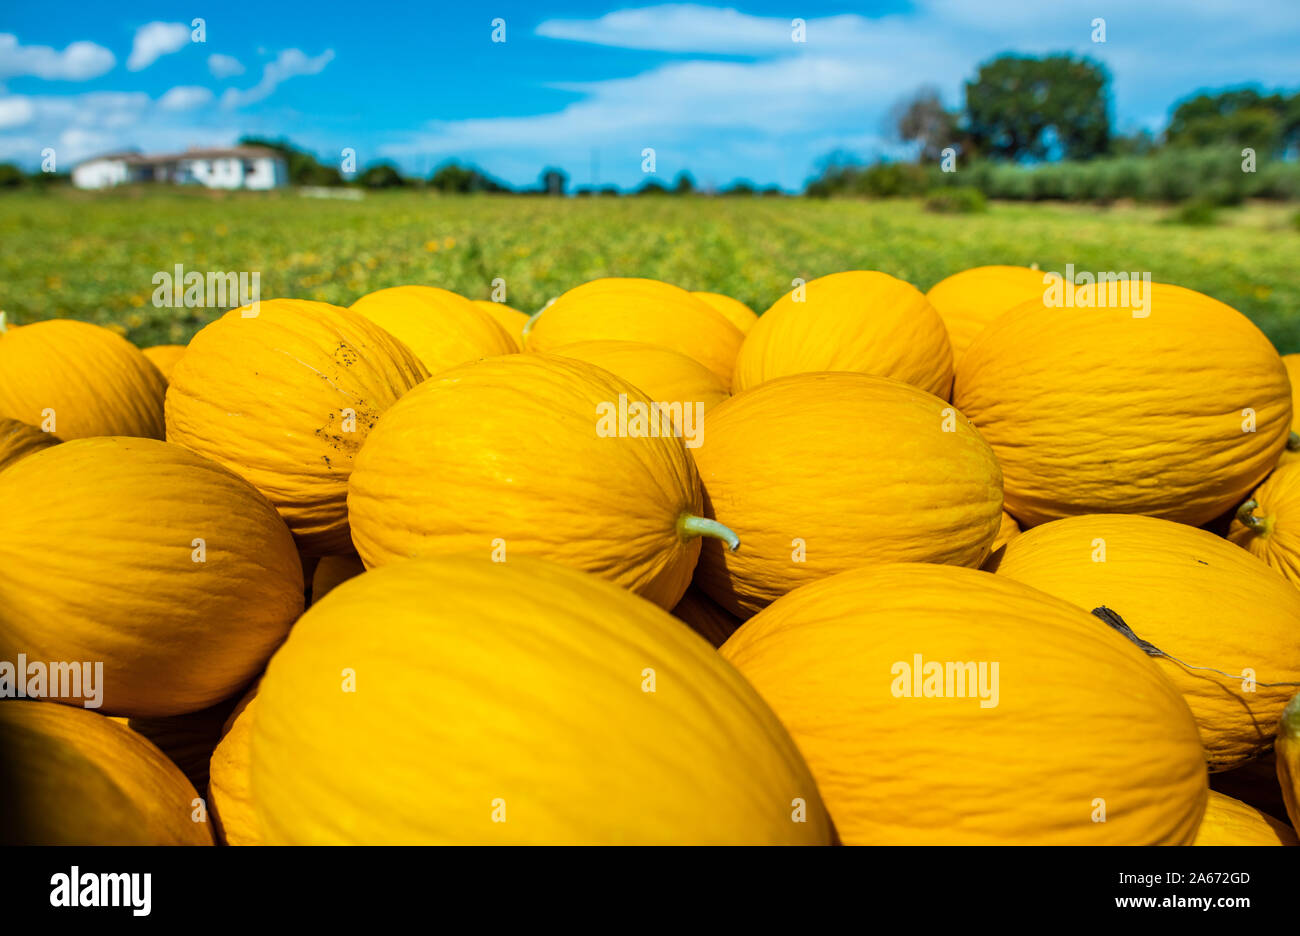 Canary yellow melons from the farm. Sunny day. Pile of melons in the plantation. Stock Photo